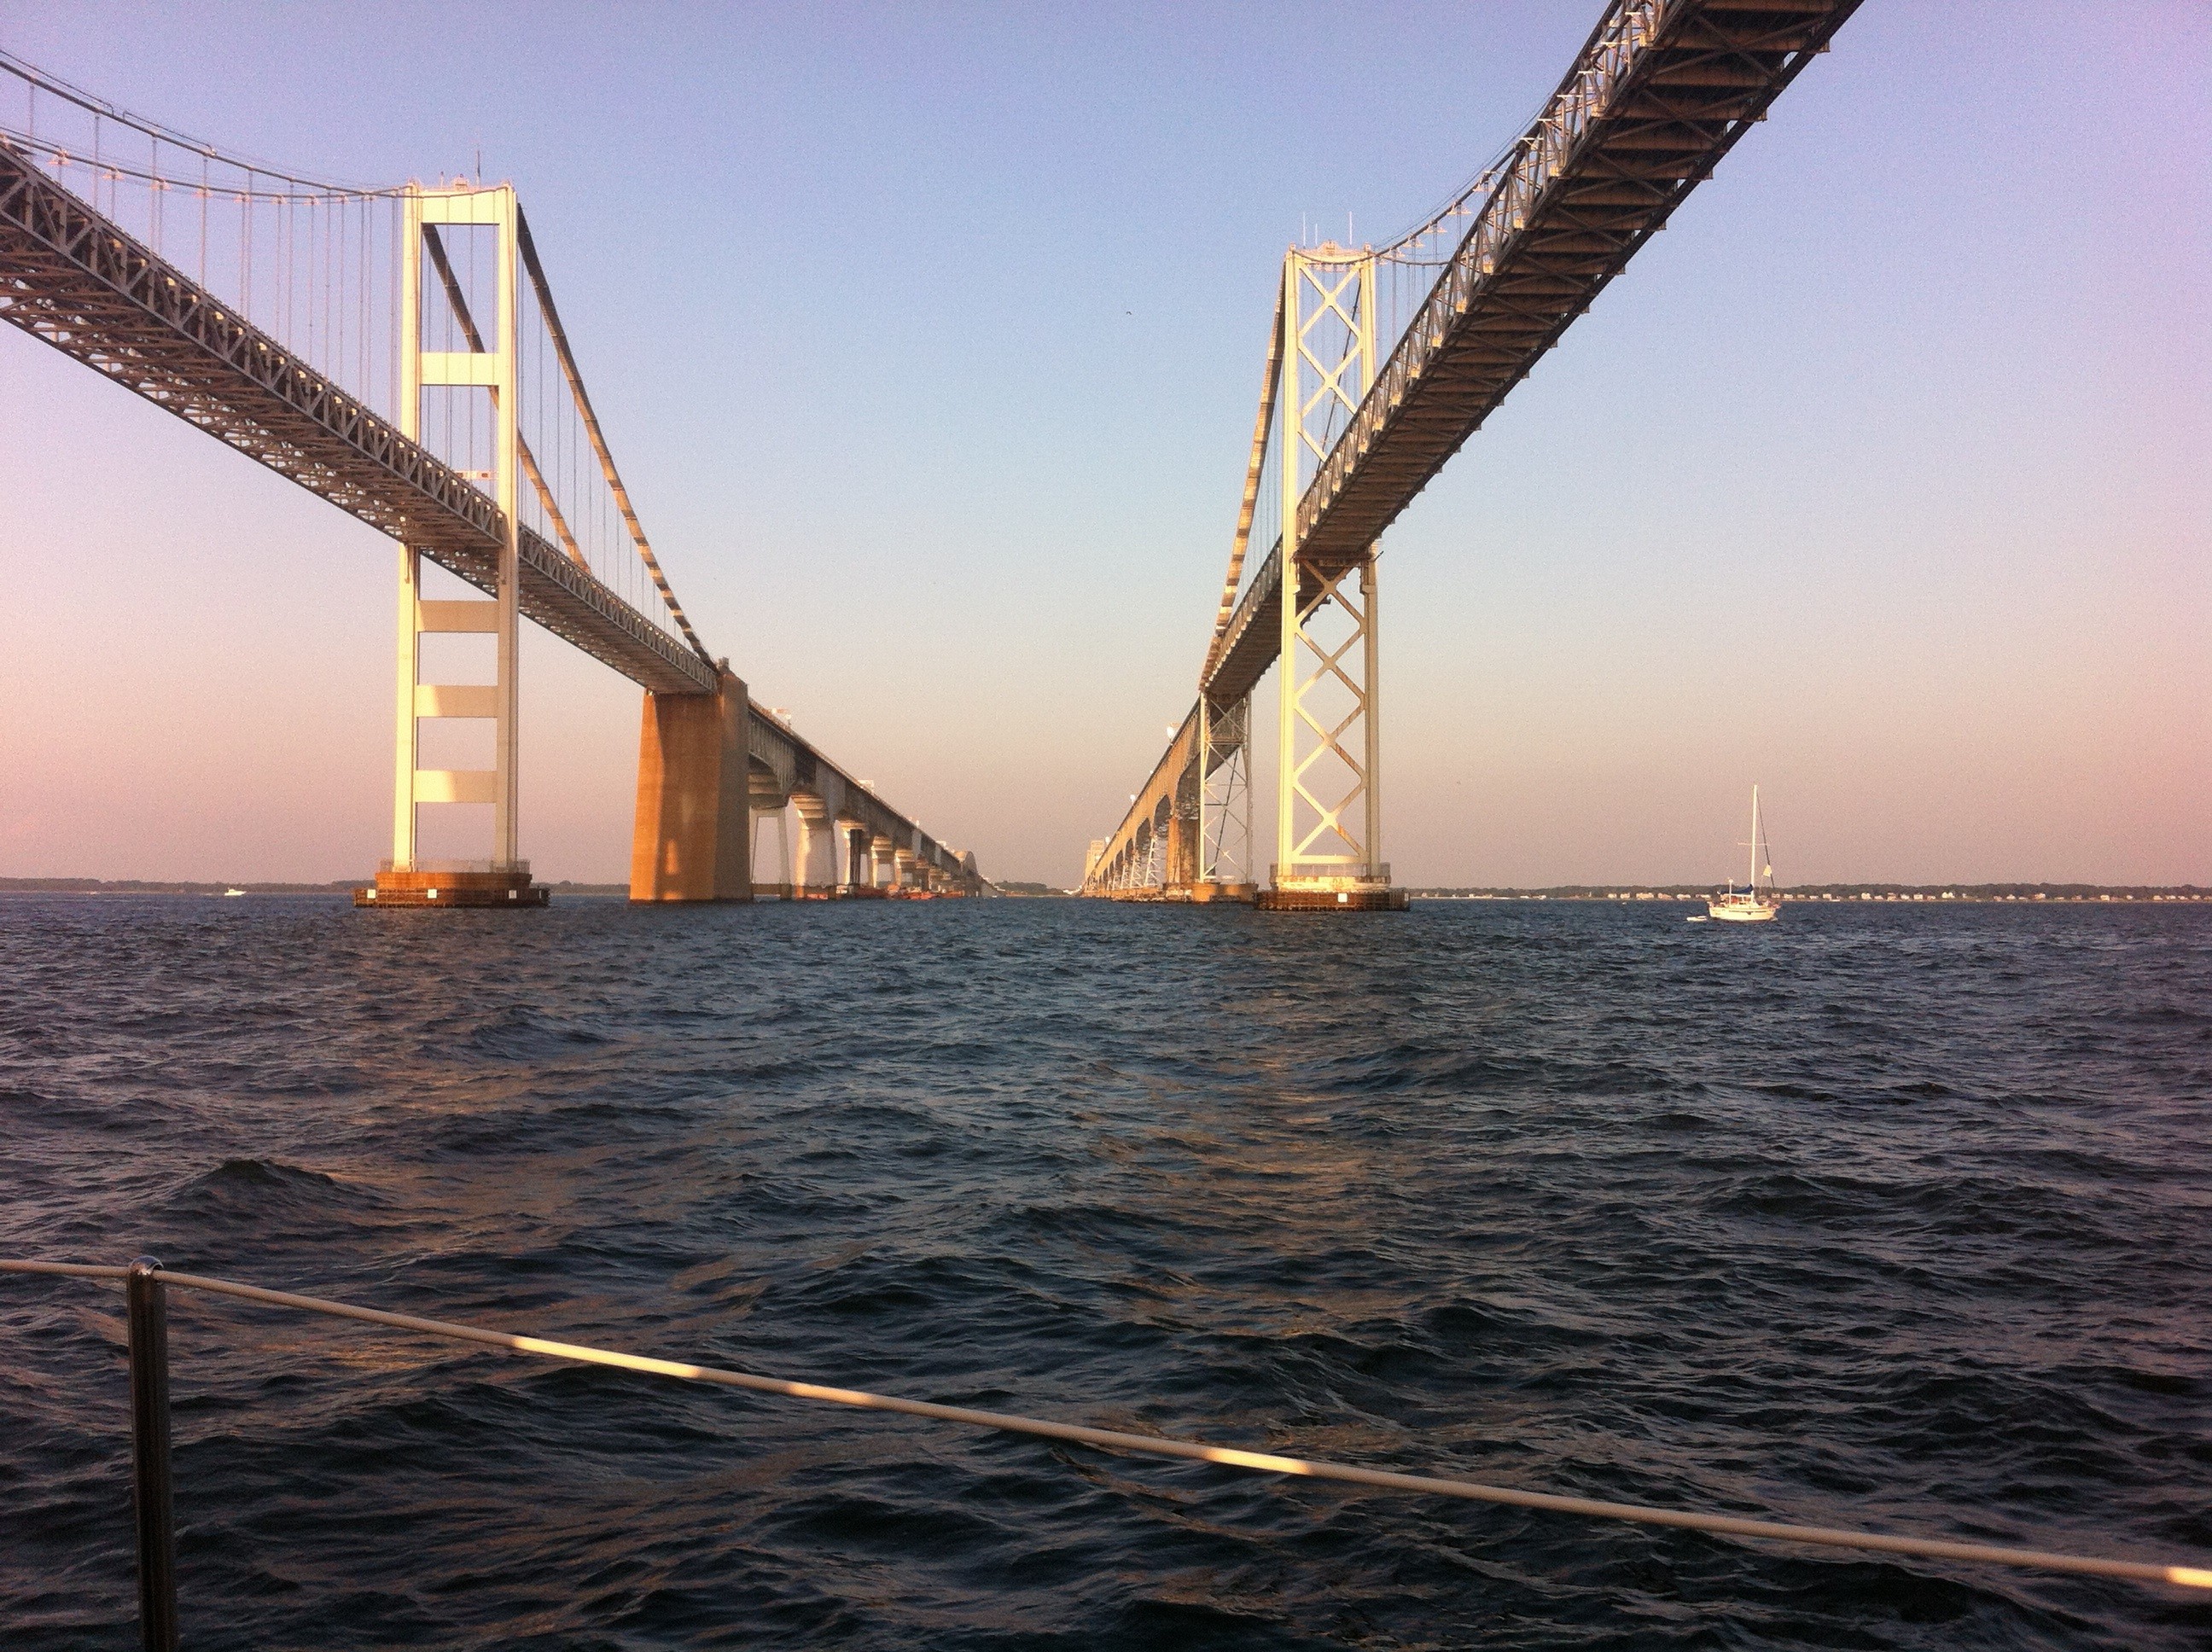 Beautiful shot of both sides of the Bay Bridge as the schooner sails under